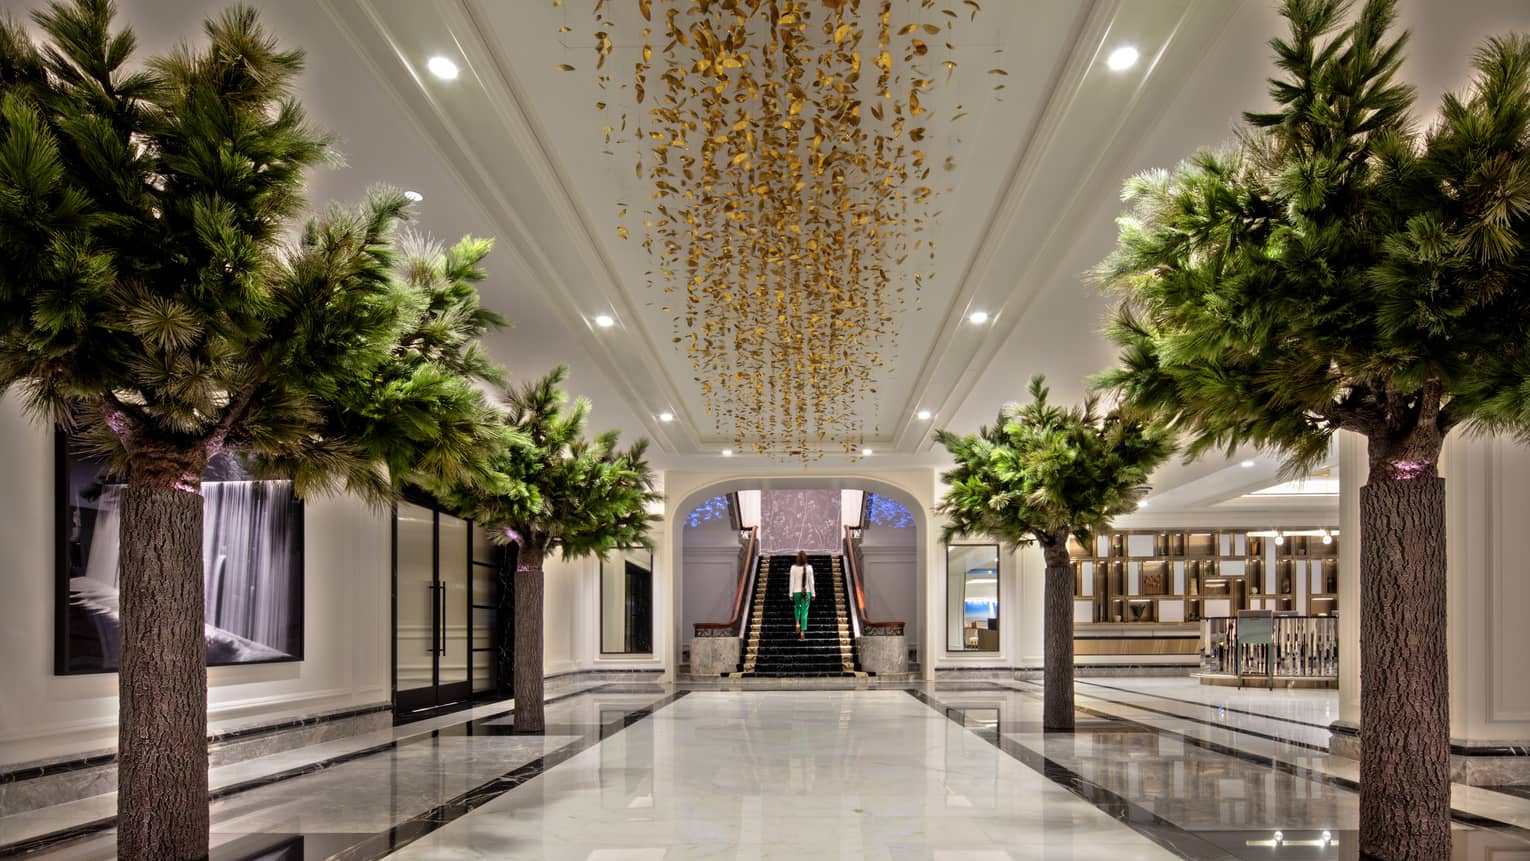 The hall of a hotel property with a gold leaf chandelier, green plants lining the hall and stairs leading up at the end.